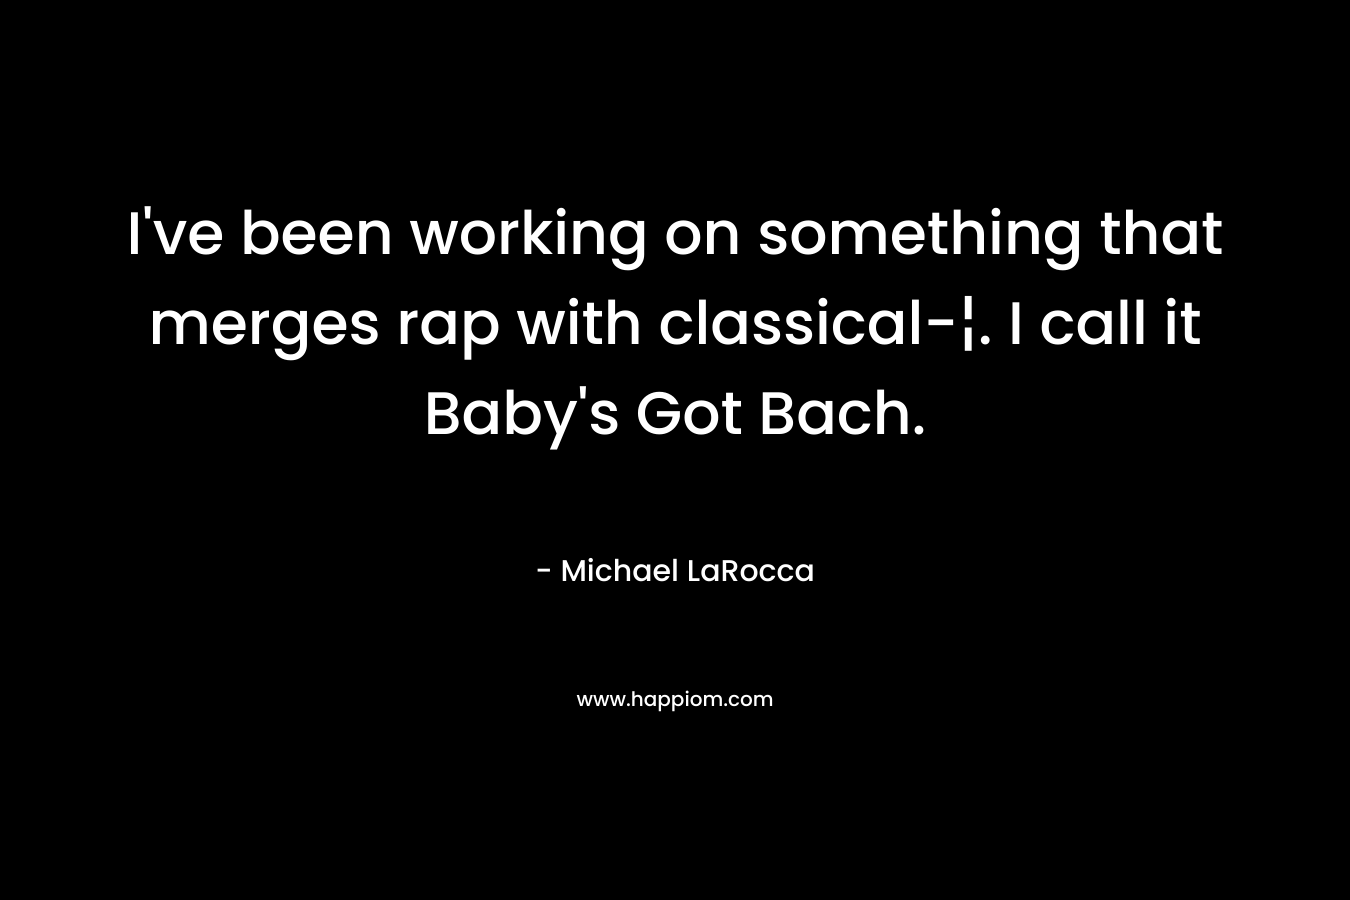 I've been working on something that merges rap with classical-¦. I call it Baby's Got Bach.